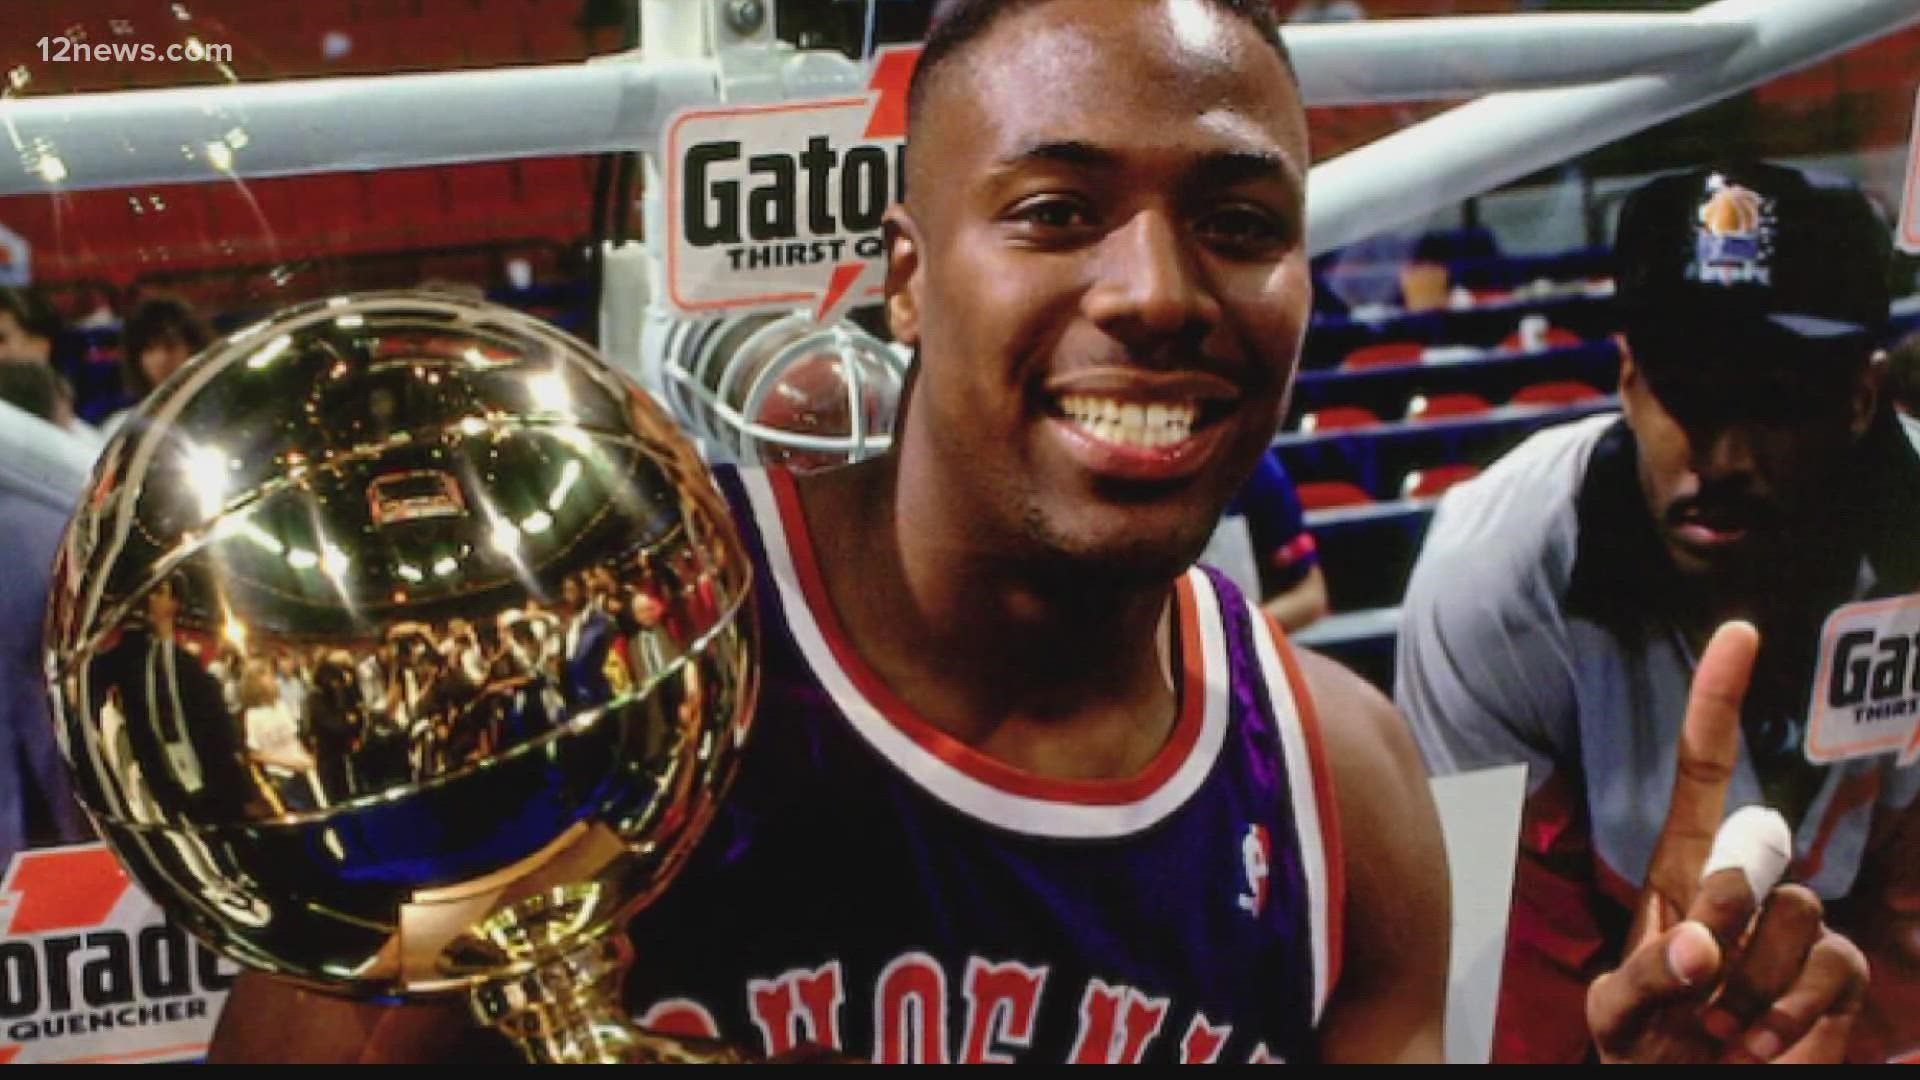 In September, fans were shocked when Cedric Ceballos tweeted out a picture of himself lying in the ICU